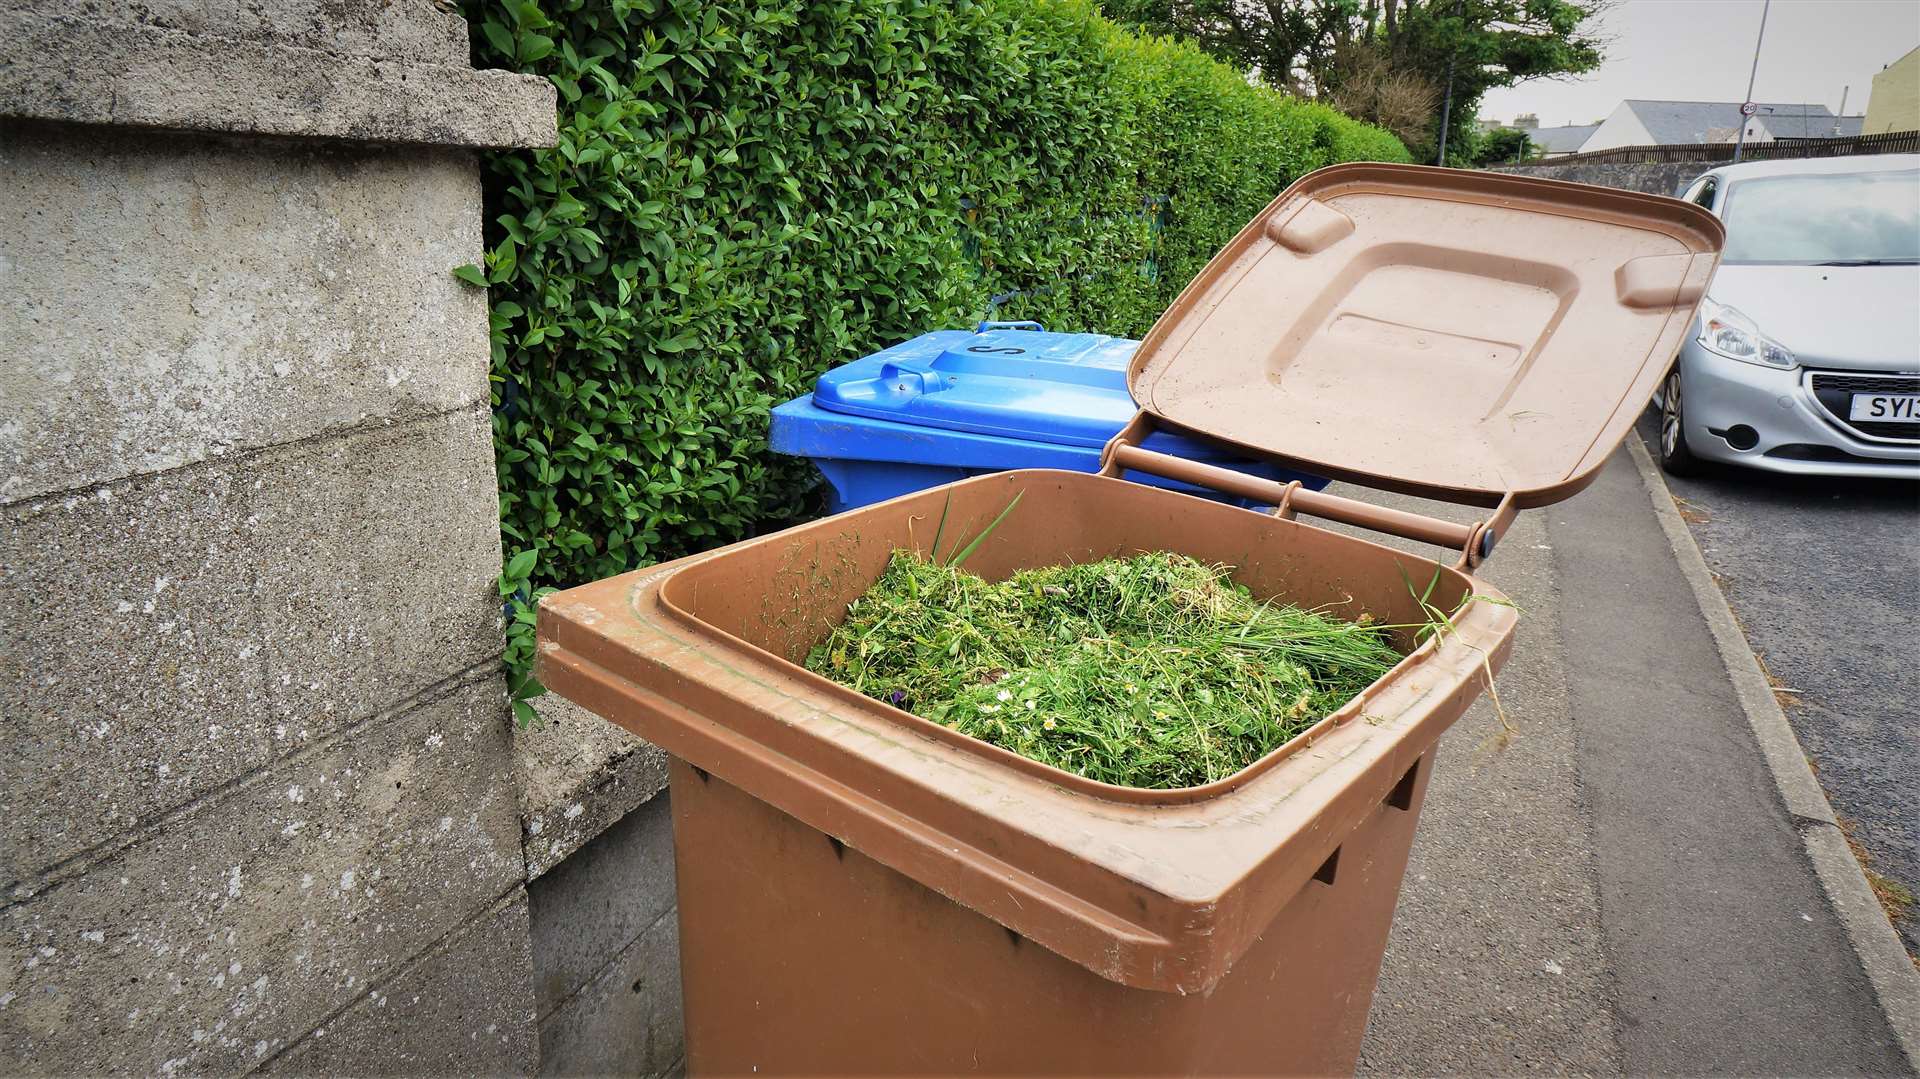 Services to collect garden waste are to be expanded.